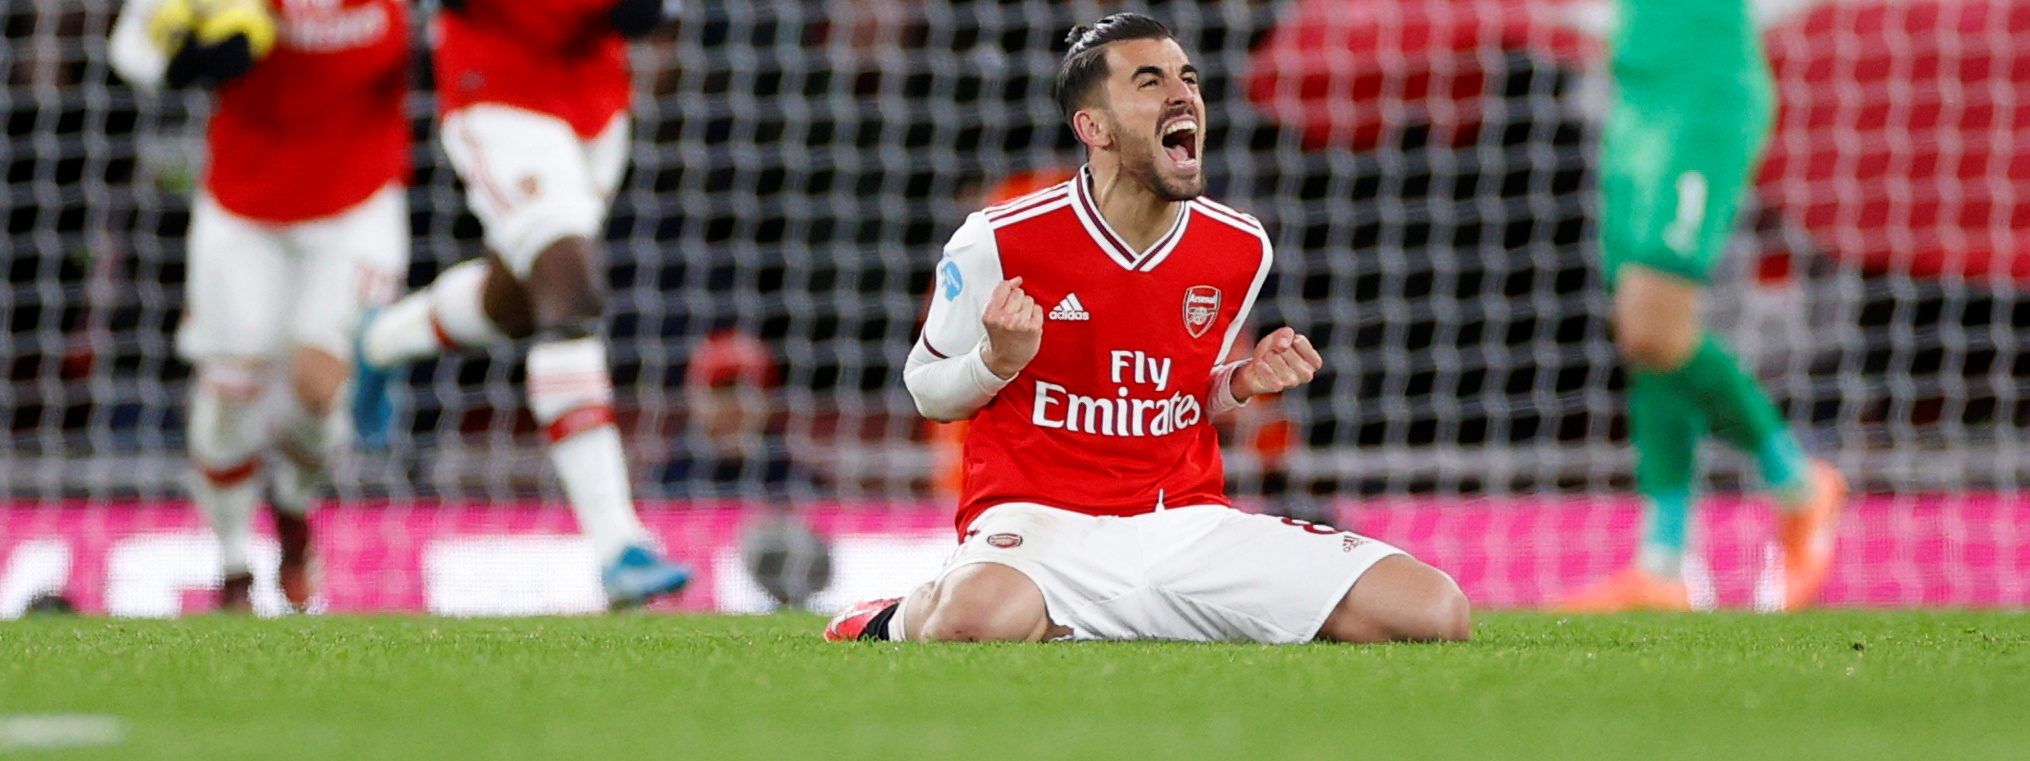 Soccer Football - Premier League - Arsenal v Newcastle United - Emirates Stadium, London, Britain - February 16, 2020   Arsenal's Dani Ceballos celebrates their first goal   Action Images via Reuters/John Sibley  EDITORIAL USE ONLY. No use with unauthorized audio, video, data, fixture lists, club/league logos or 